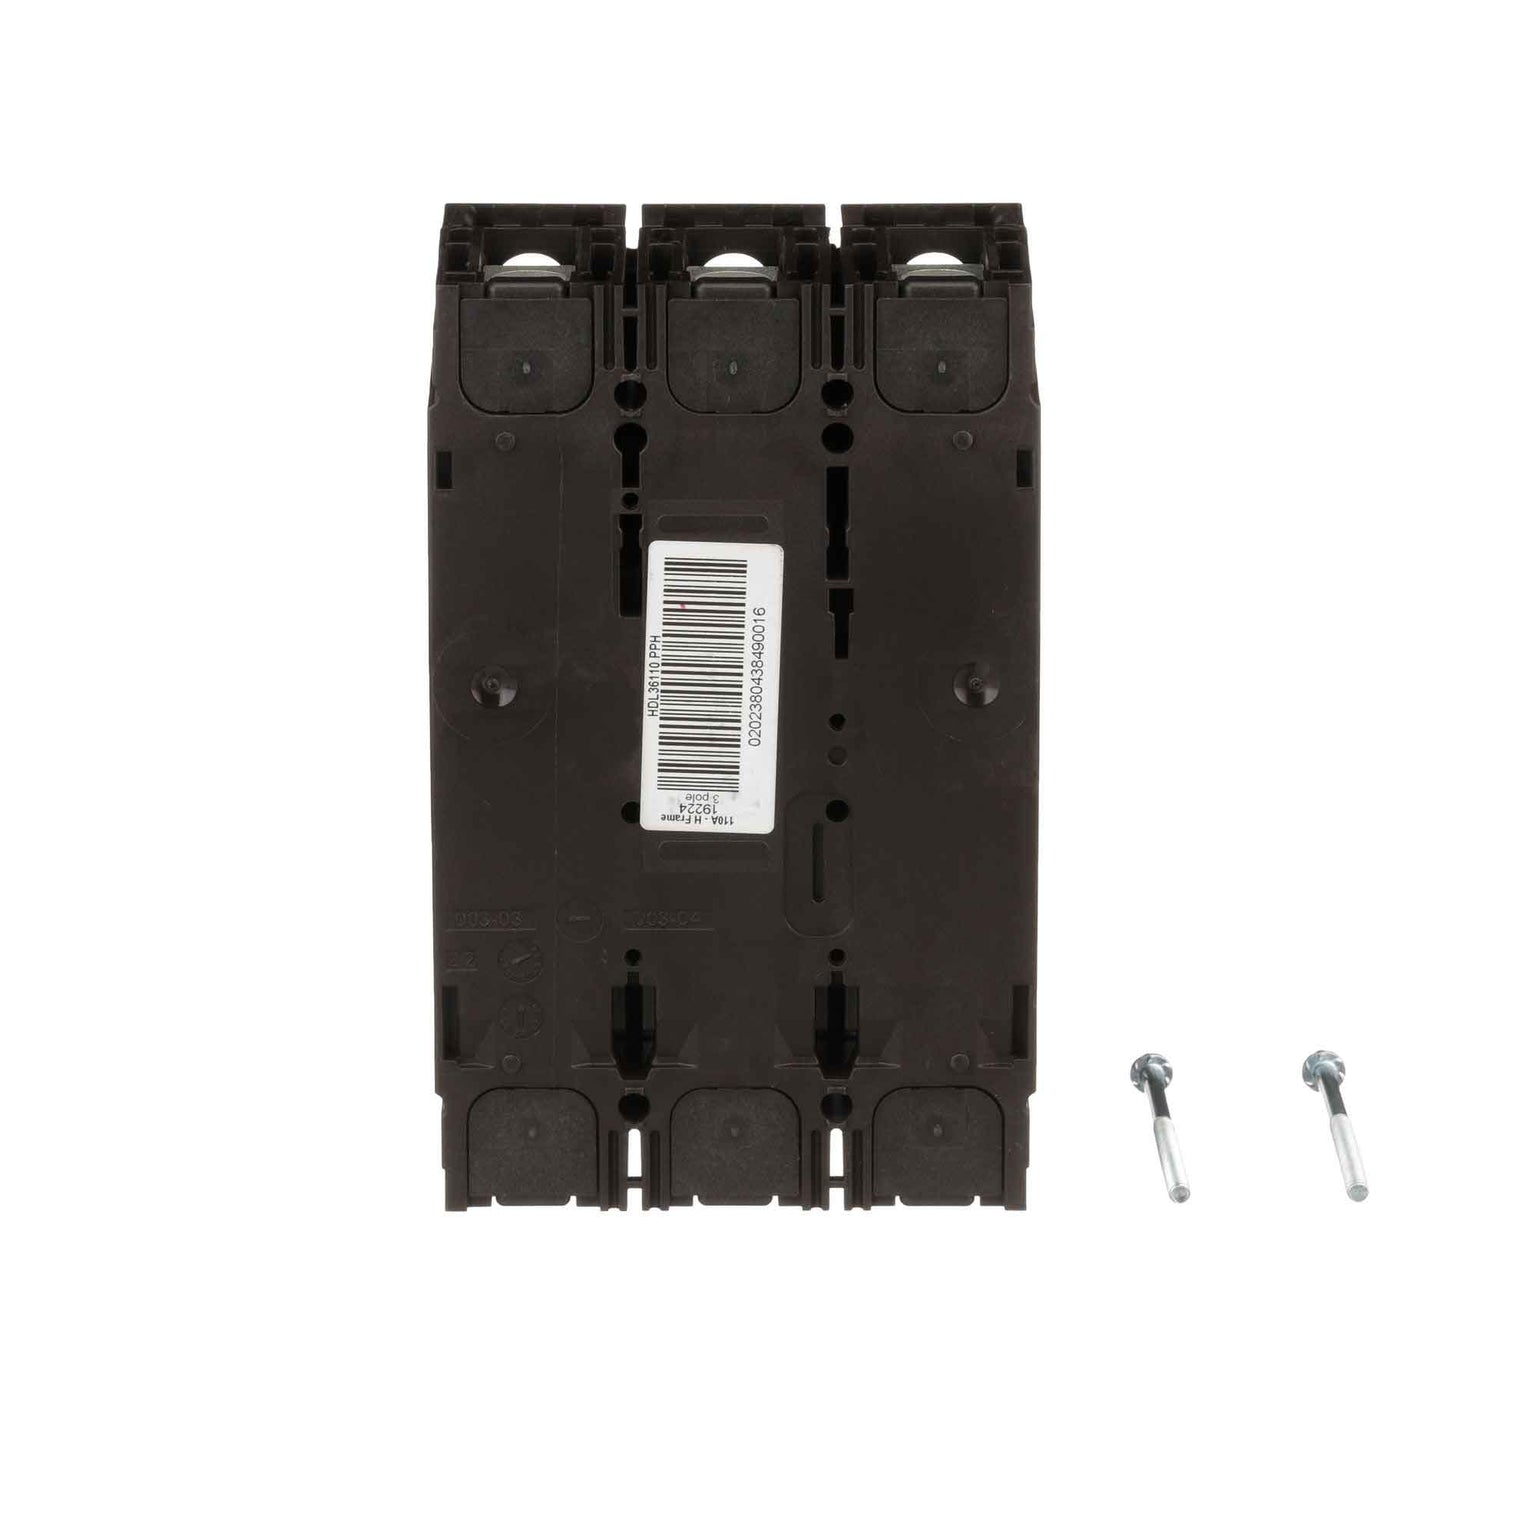 HDL36110 - Square D - Molded Case Circuit Breakers